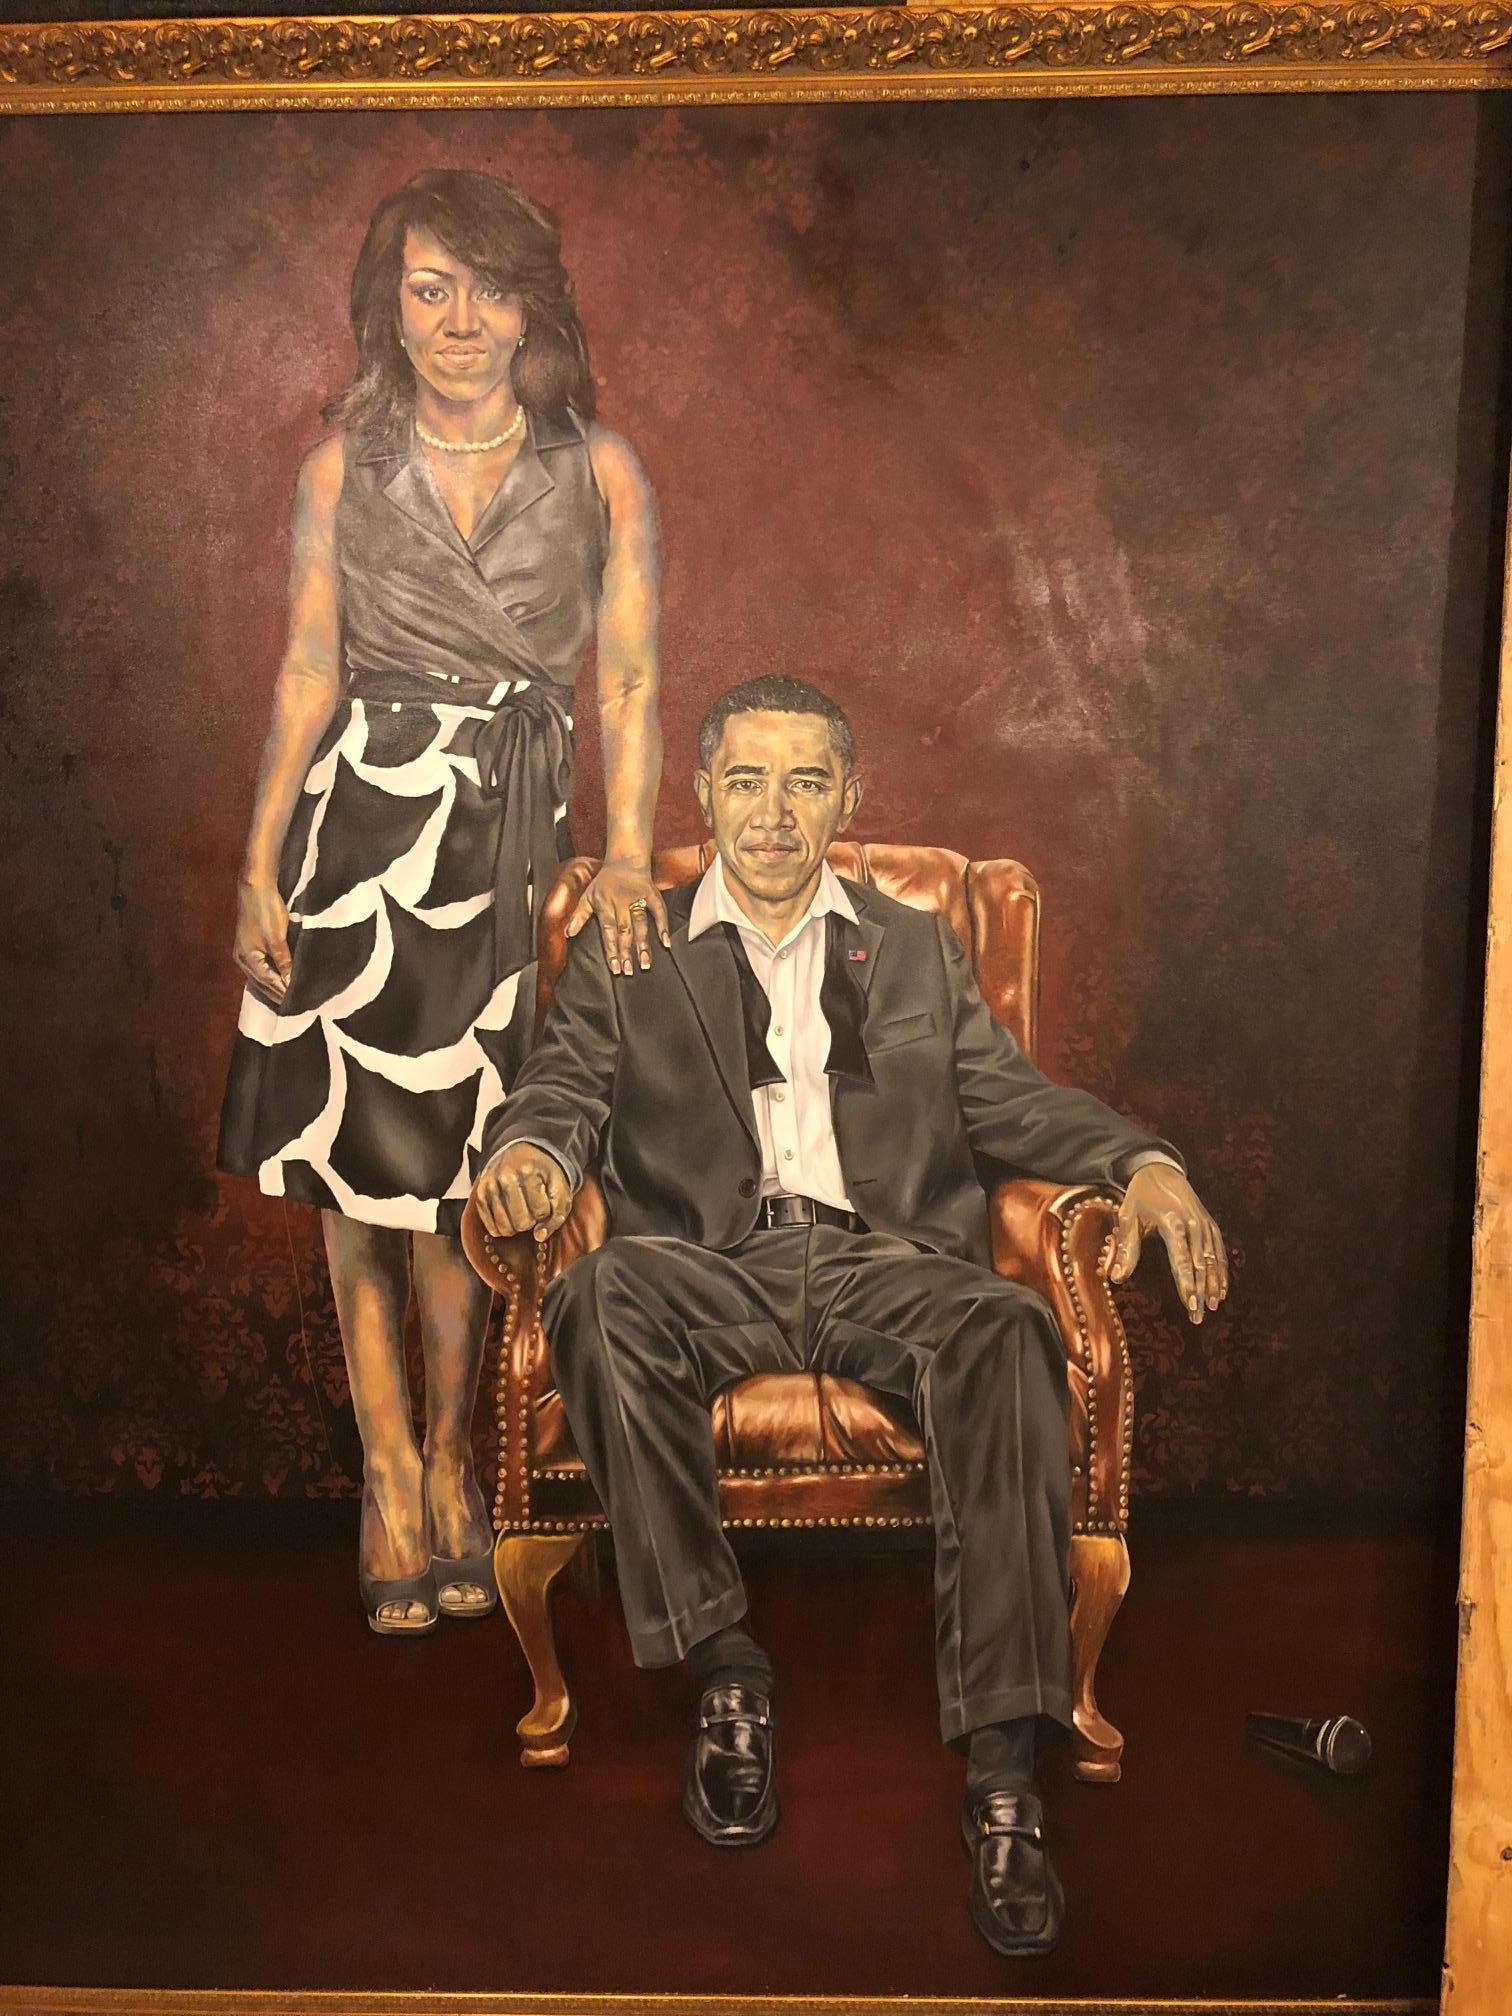 My President is, Michelle & Barack Obama - Painting by Robert Peterson